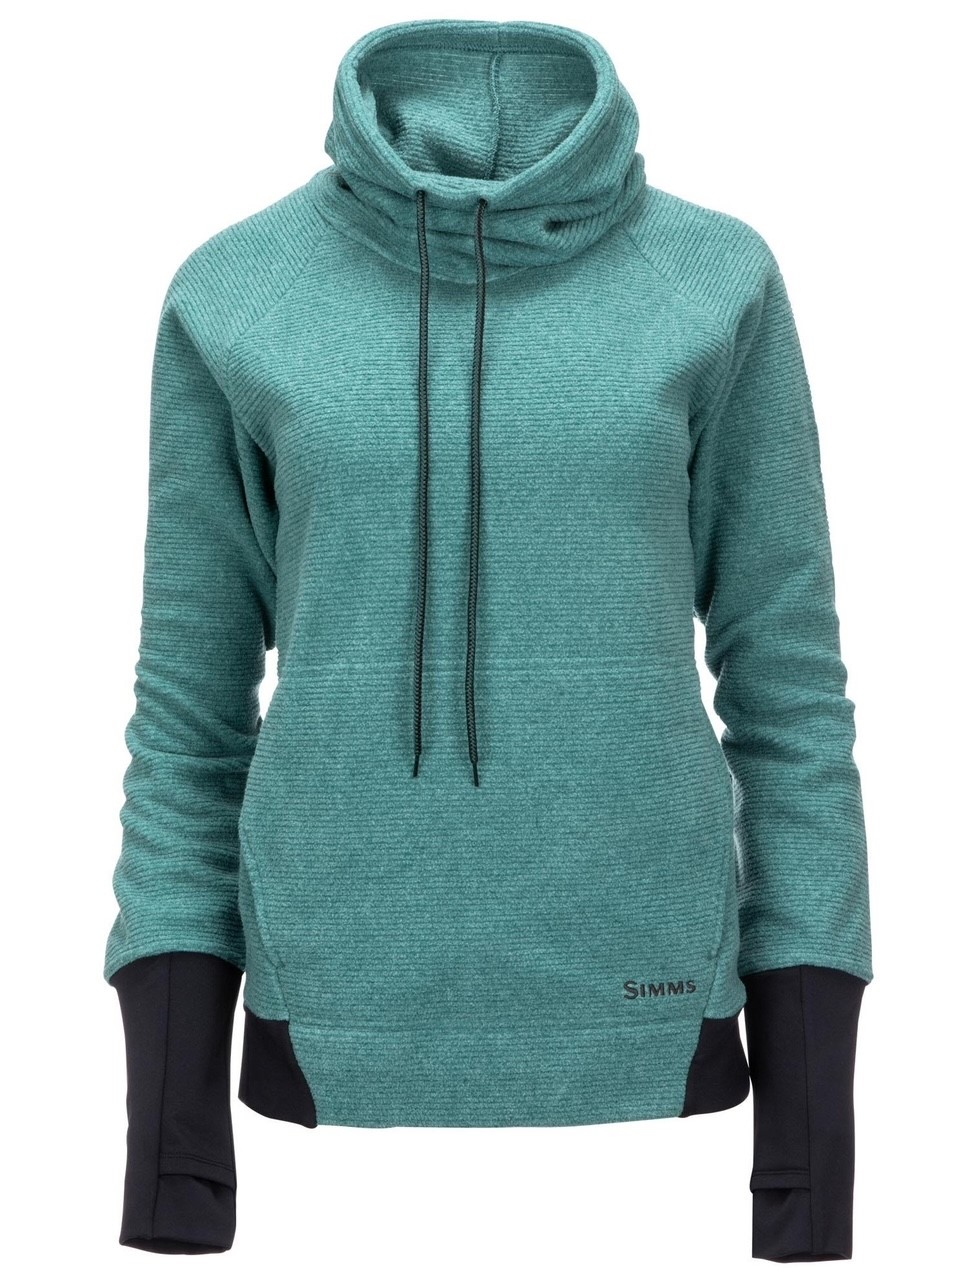 Simms W's Rivershed Hoody - Avalon Teal - Small